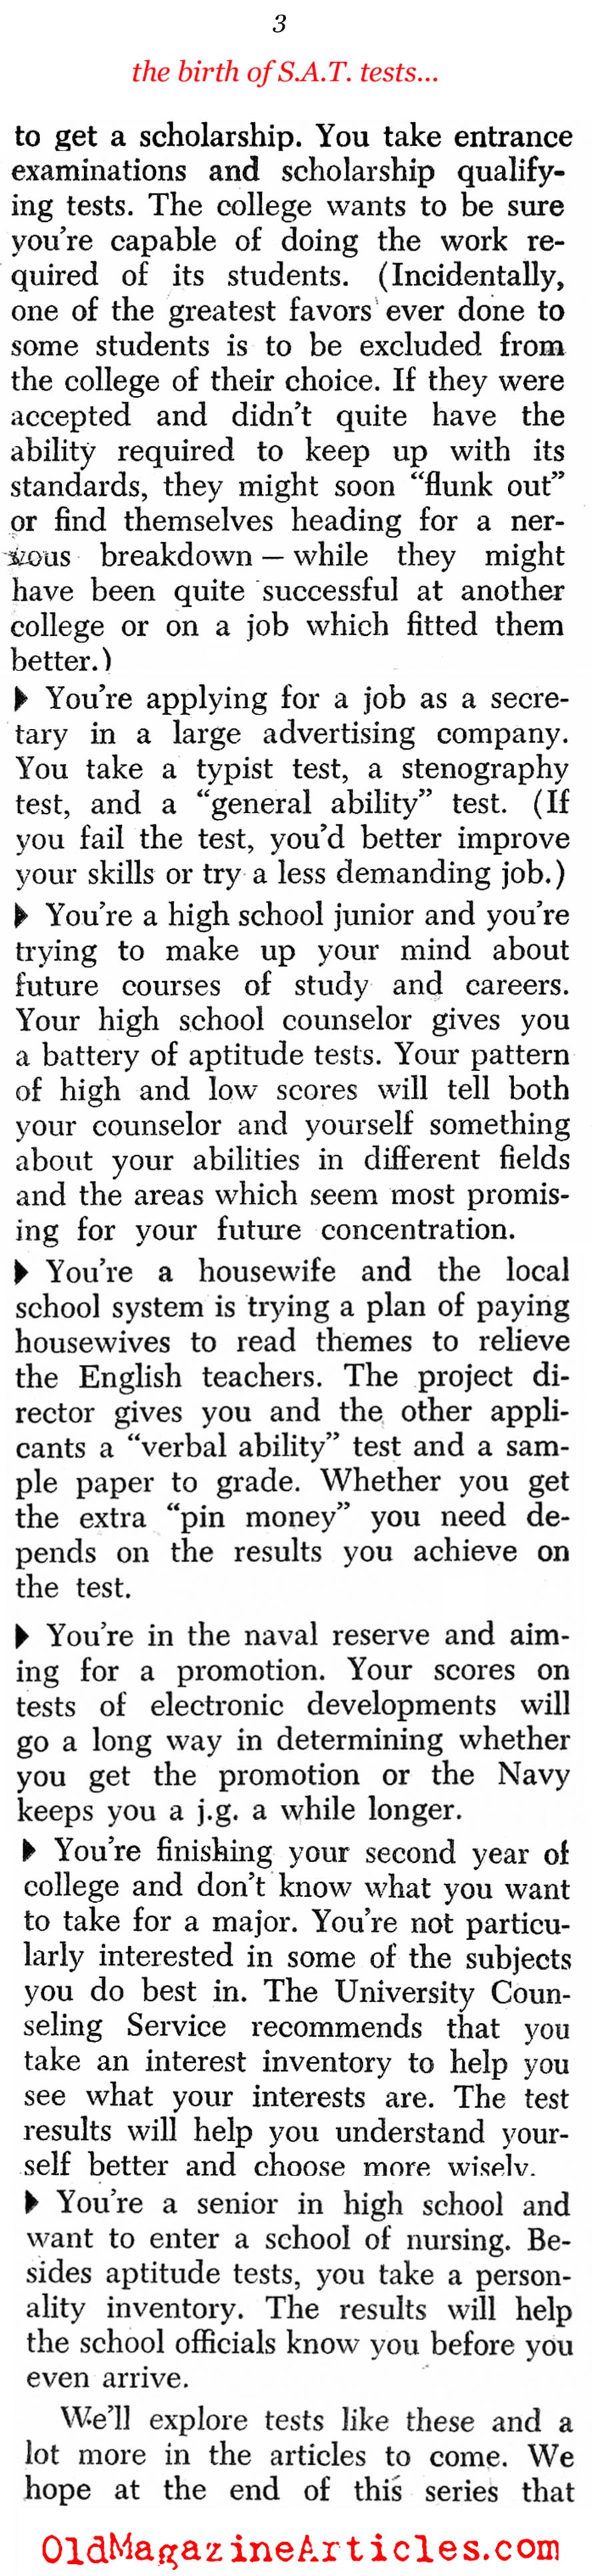 The Onslaught of Standardized Tests (World Week, 1958)